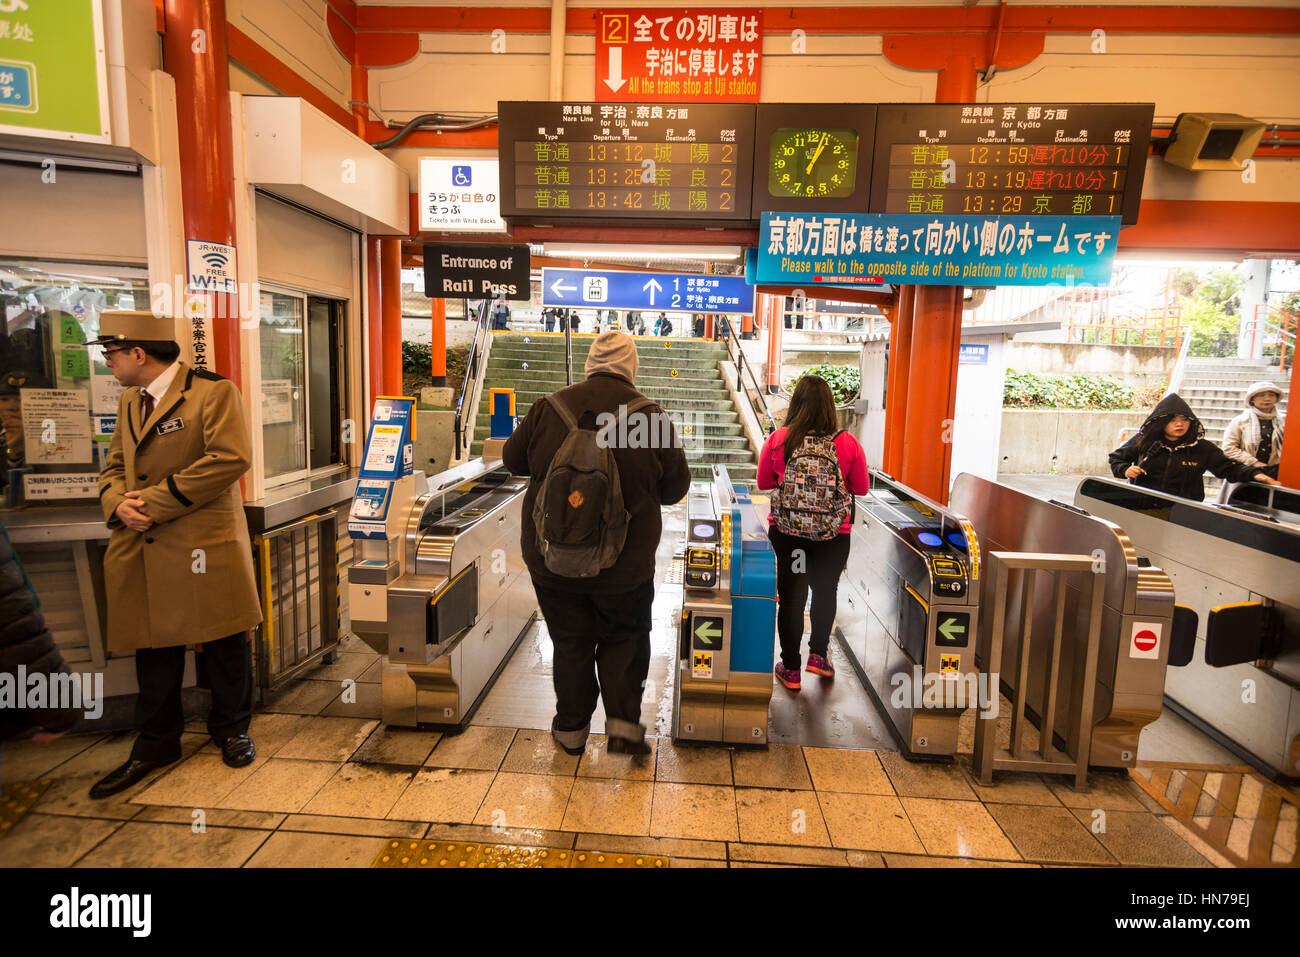 JR Inari Station ticket barriers, Kyoto, Japan Stock Photo